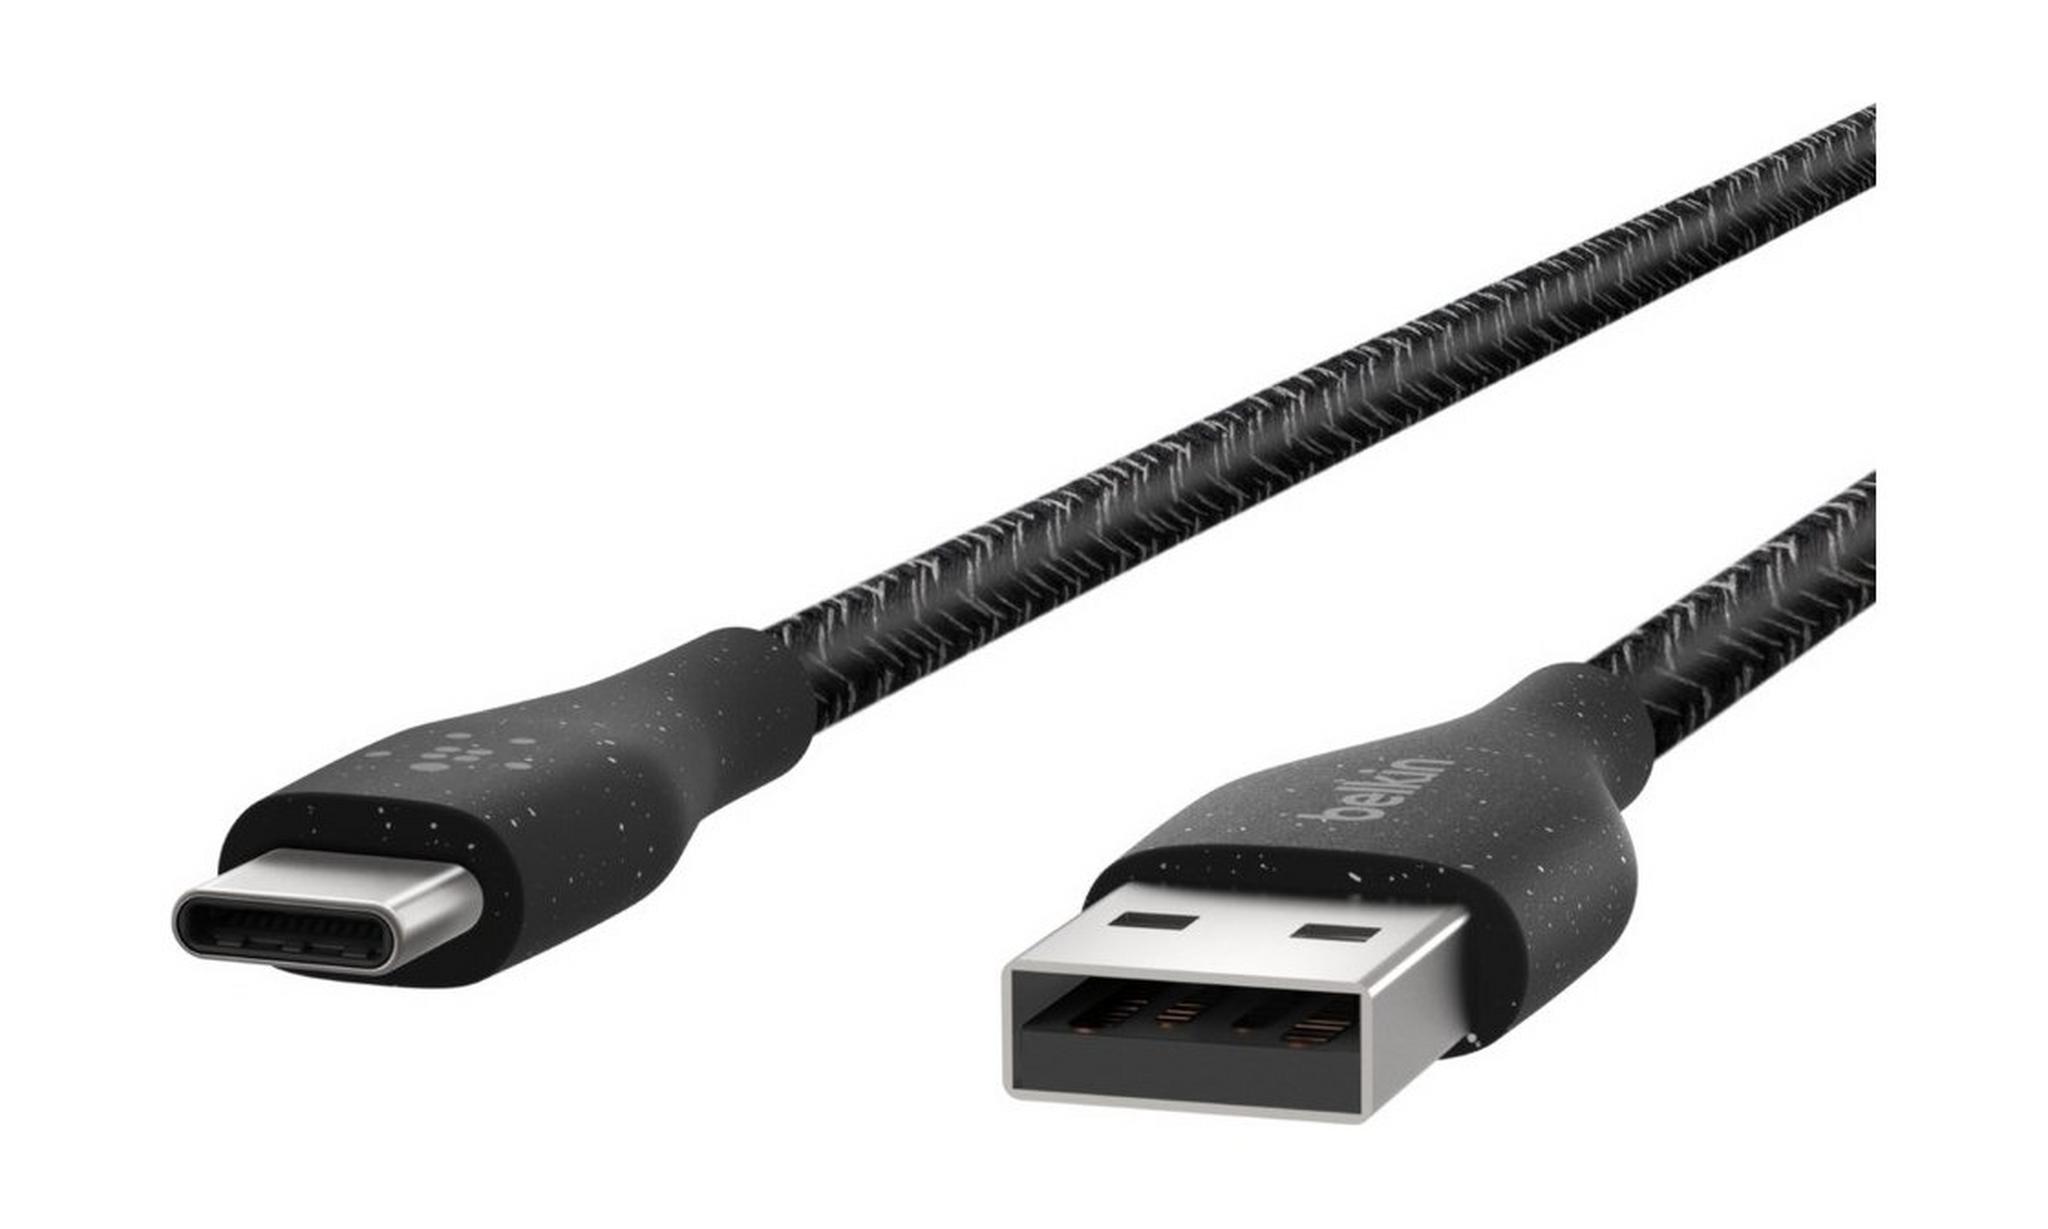 Belkin DuraTek Plus USB-C to USB-A Cable with Strap - 1M - Black